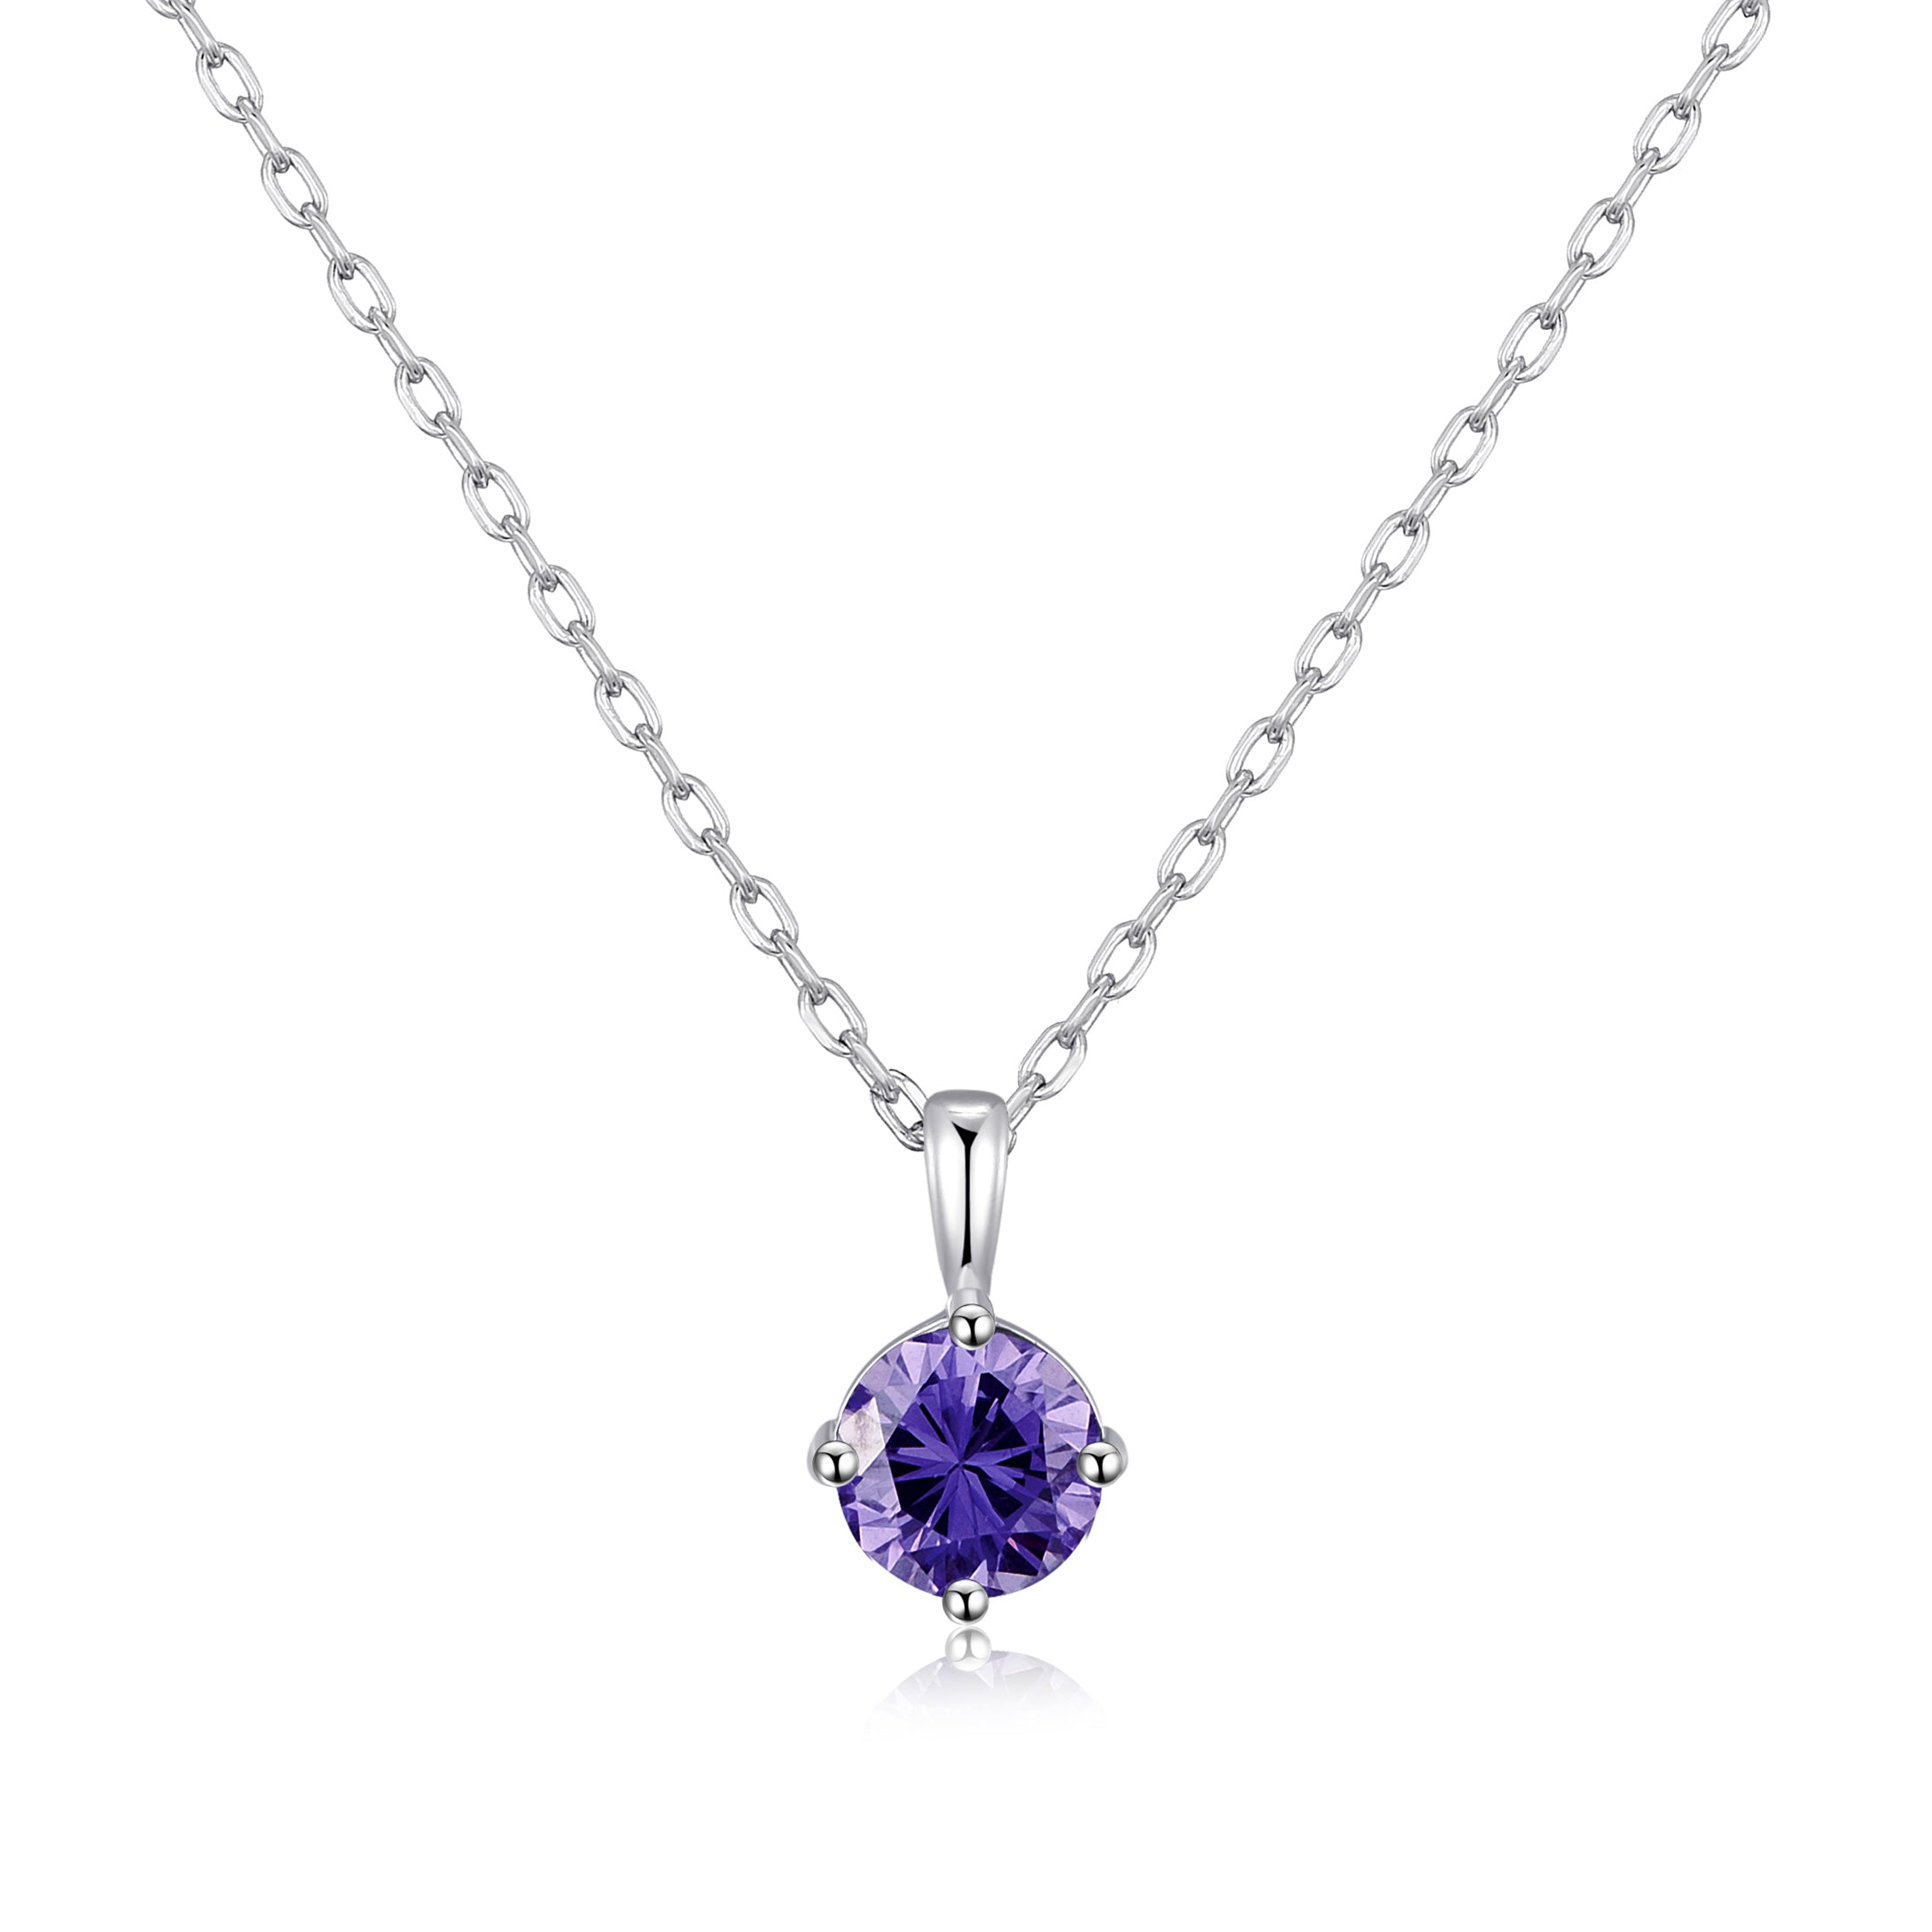 Sterling Silver February (Amethyst) Birthstone Necklace Created with Zircondia® Crystals by Philip Jones Jewellery